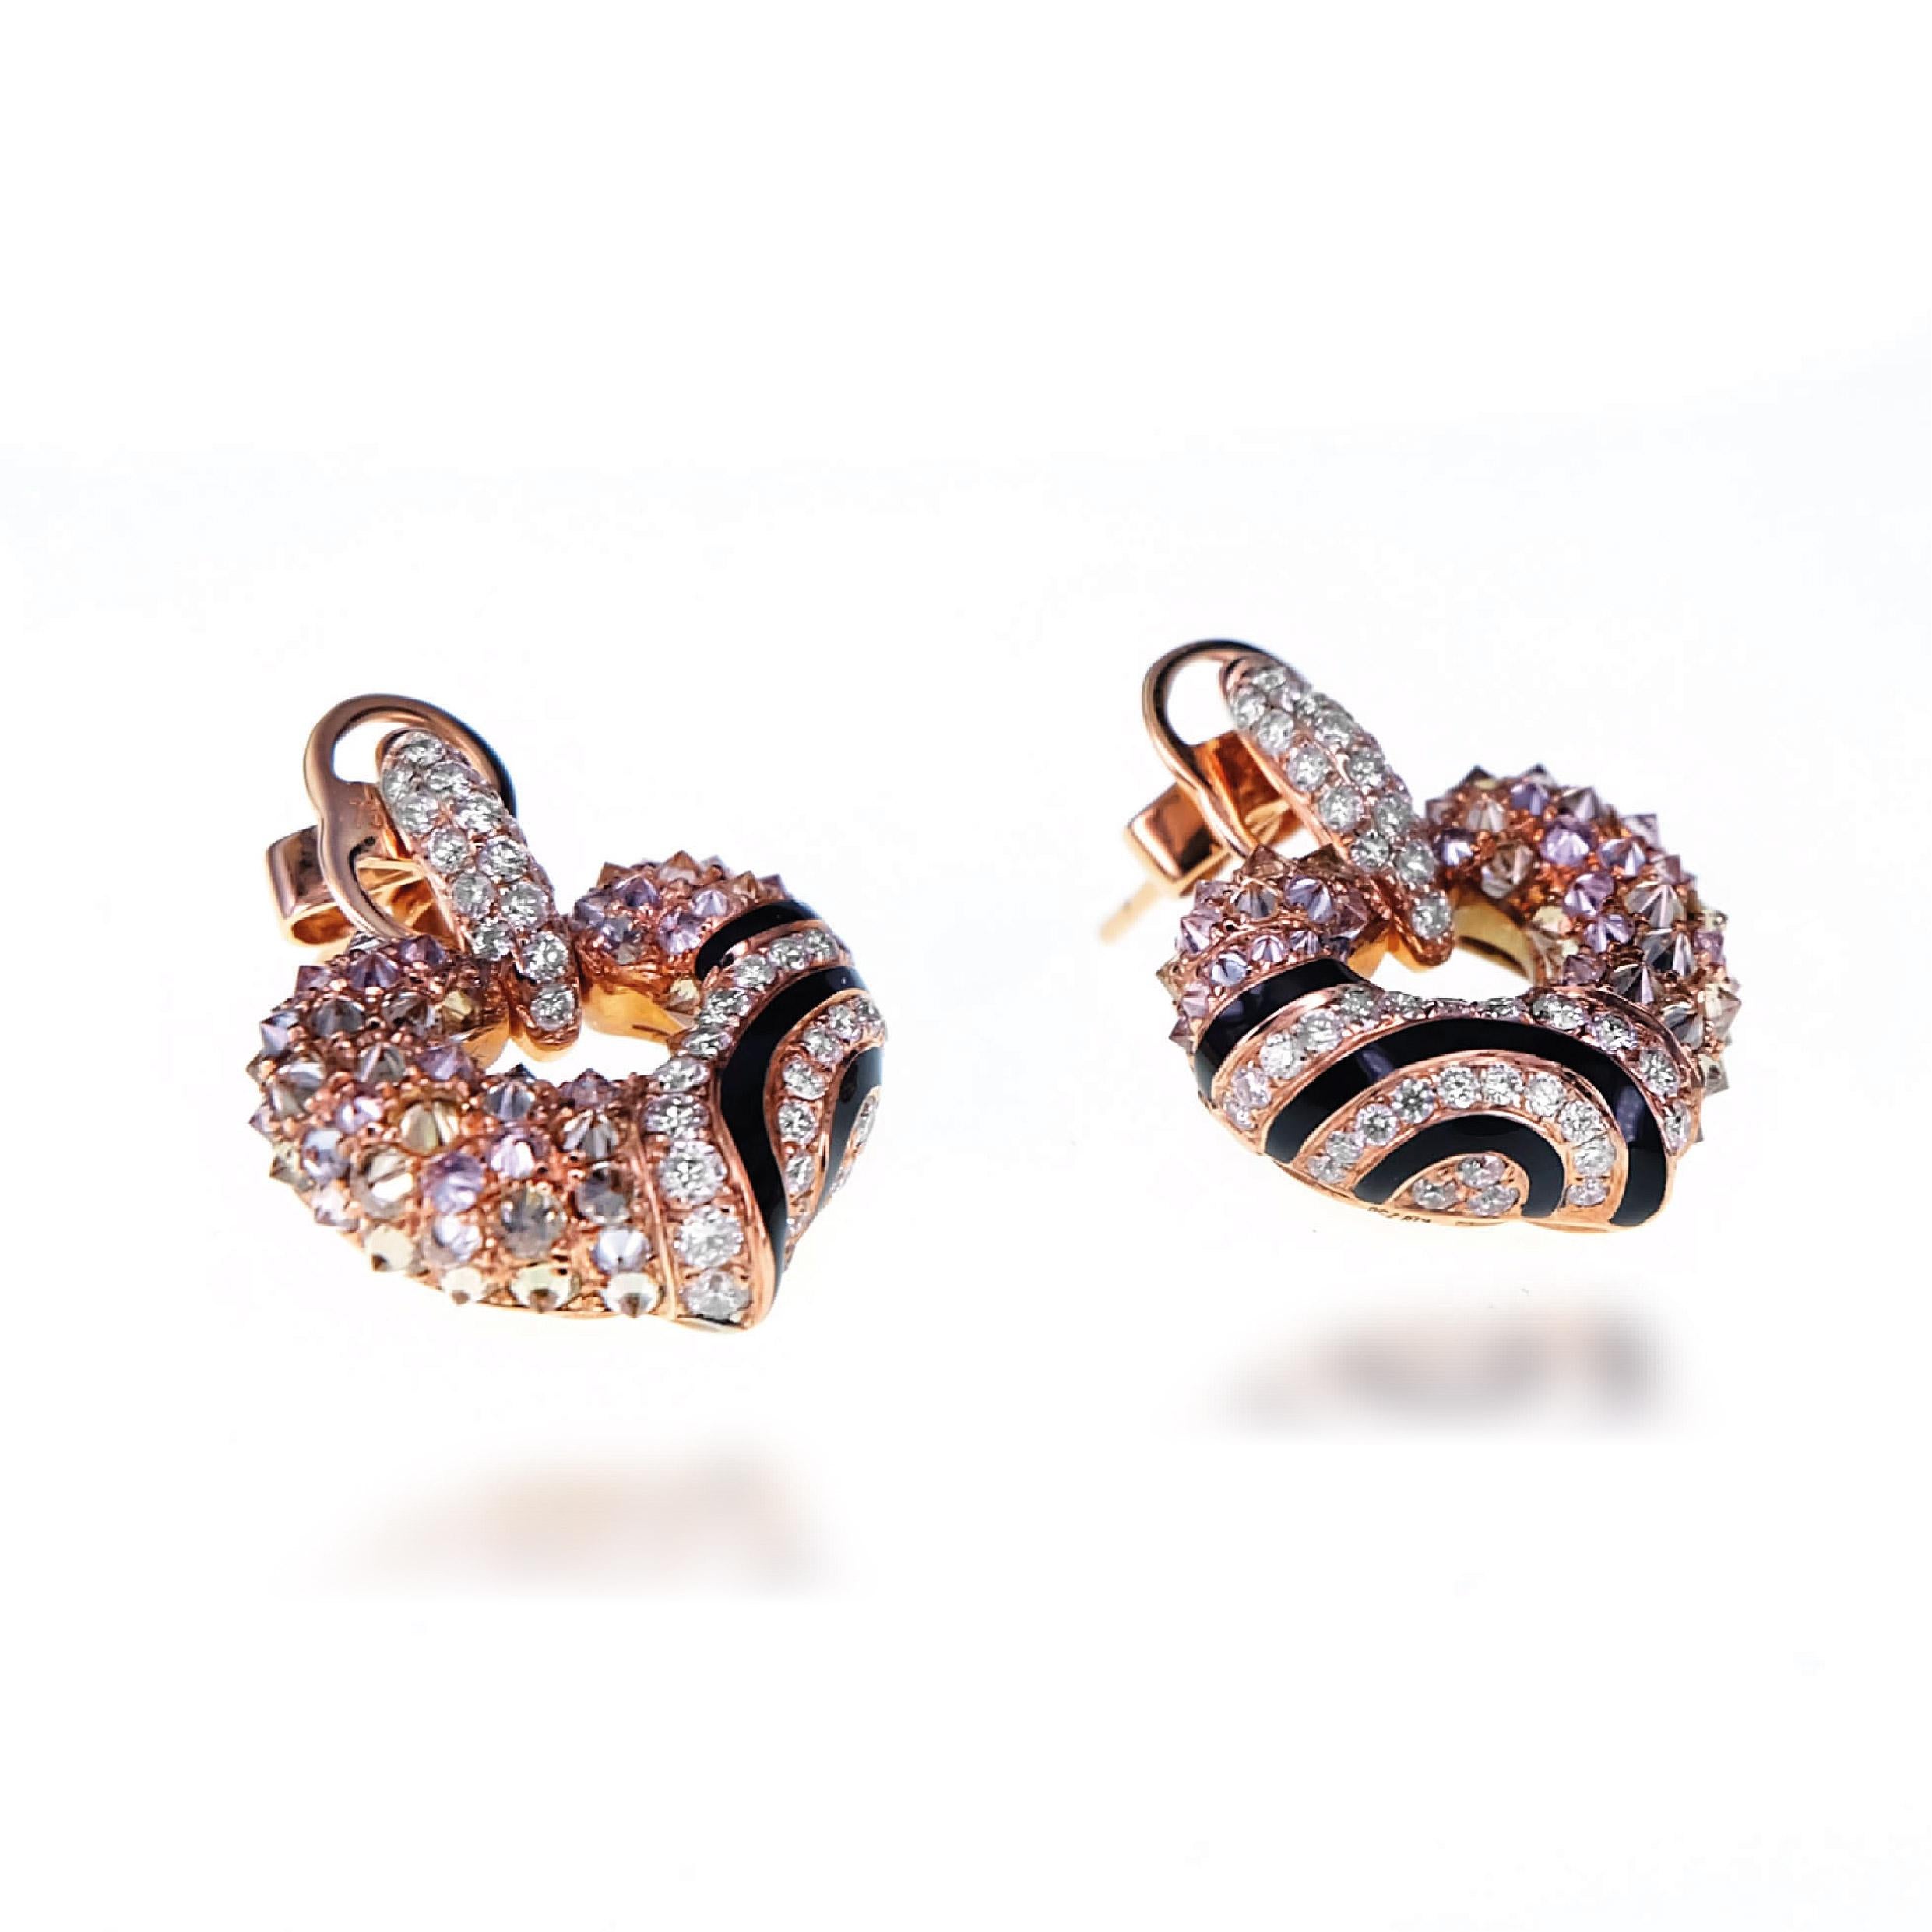 2.52 carat of natural fancy color diamond are set along with onyx in this art deco style earring. 
The details of the earring are as follows:
Color: F
Clarity: VS
The diamonds are set in an upside down setting to give the earring a 3 Dimensional